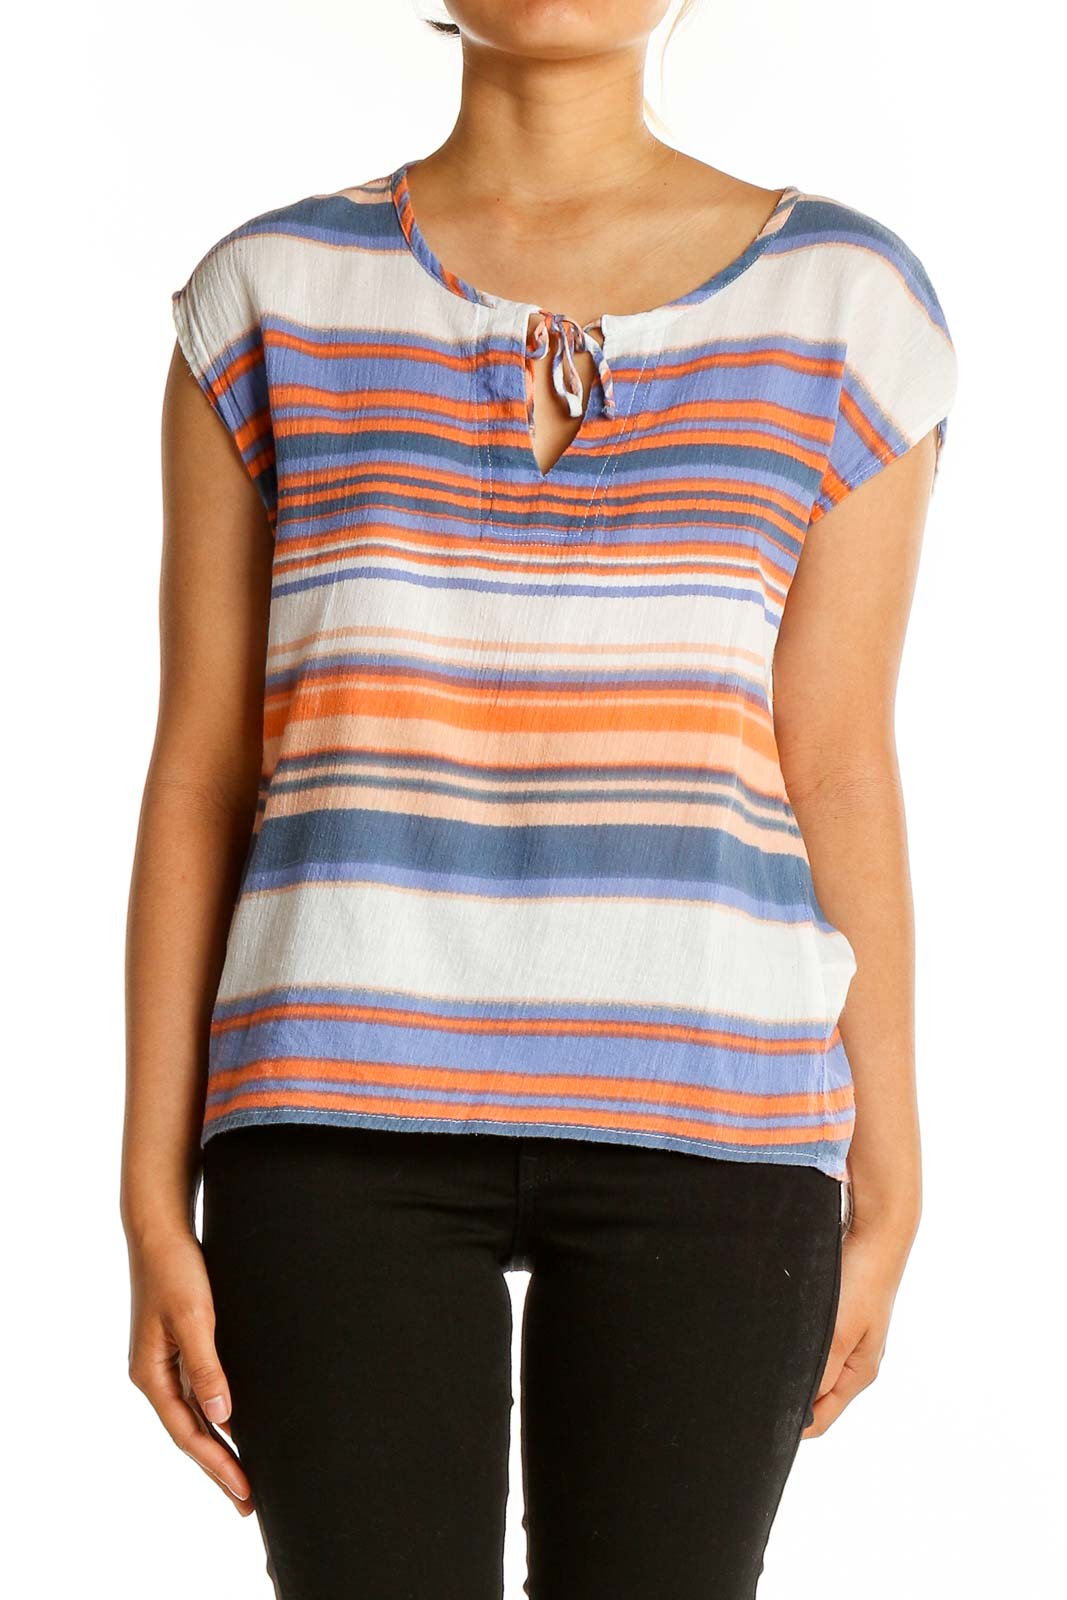 White Blue Orange Candy Stripes Top Front